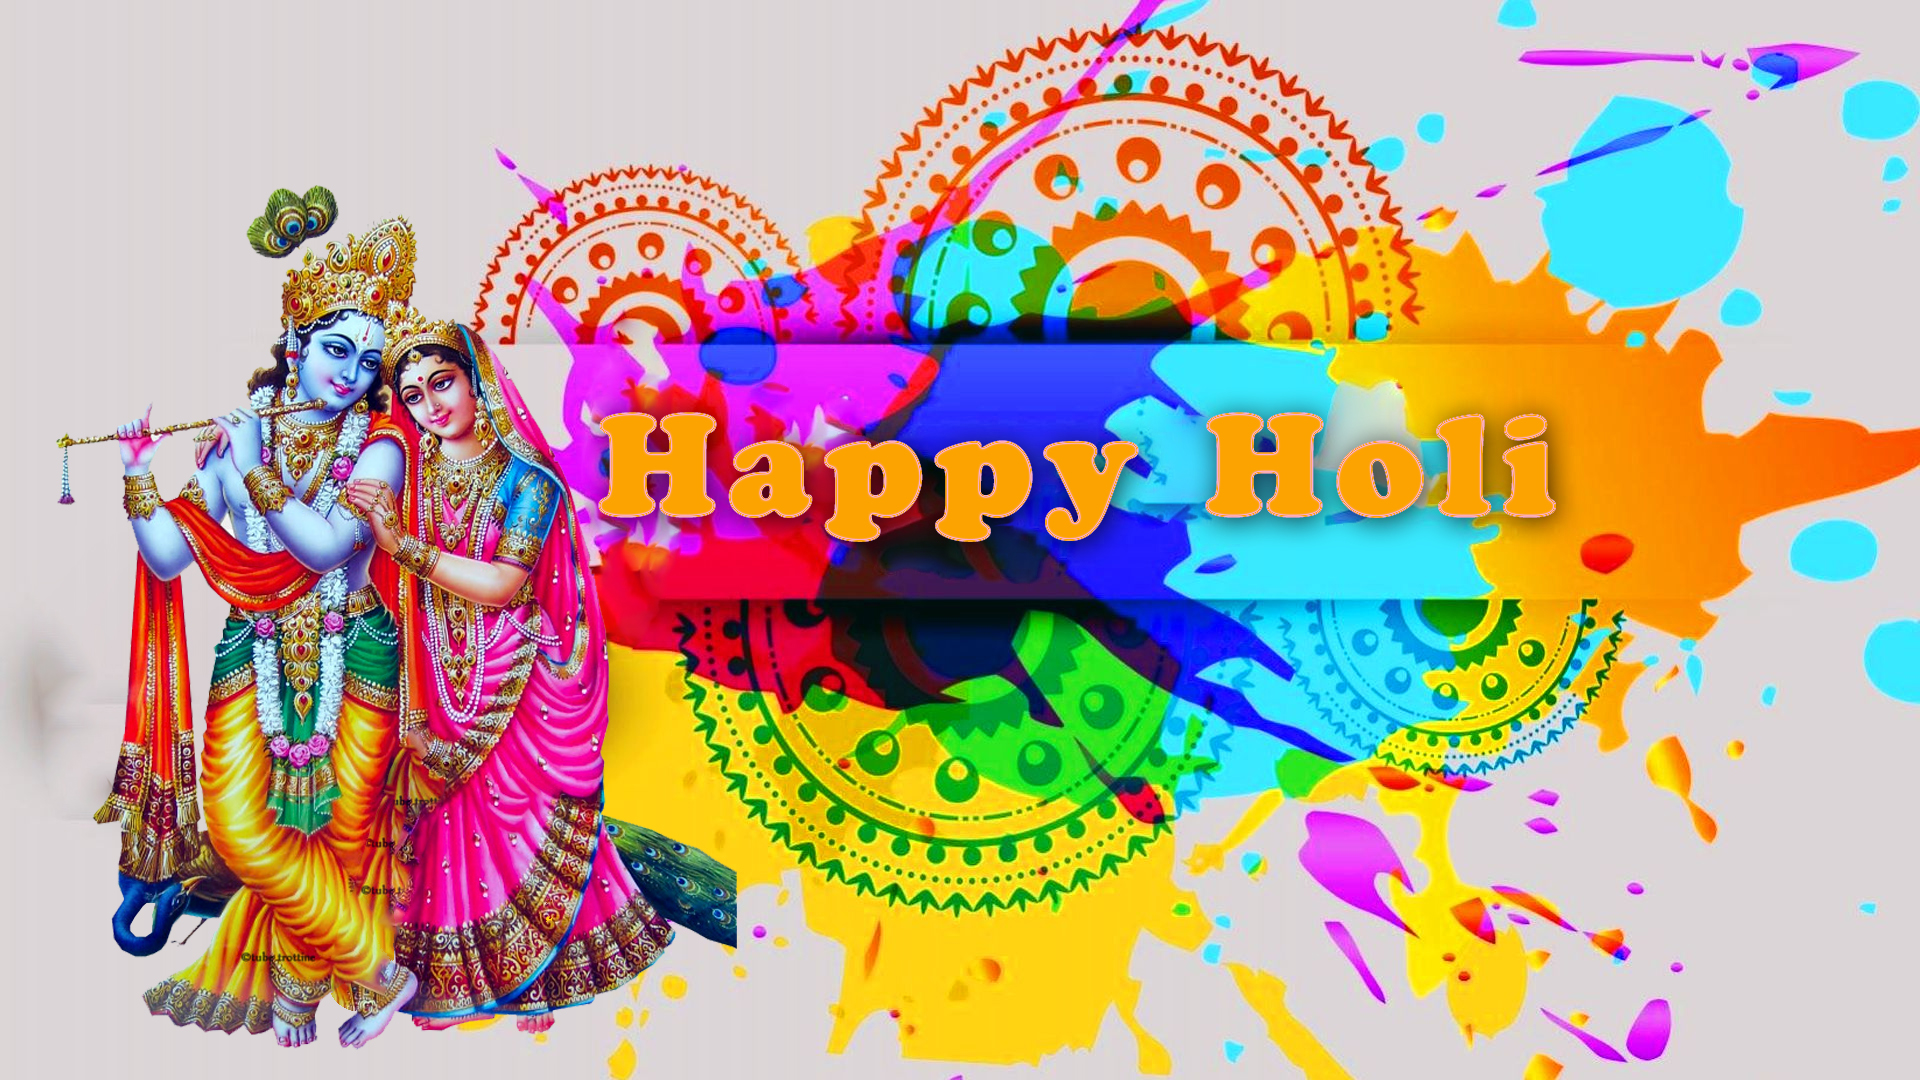 Happy Holi Love Sms Wishes Quotes Image - Holi Images Hd 2019 - HD Wallpaper 